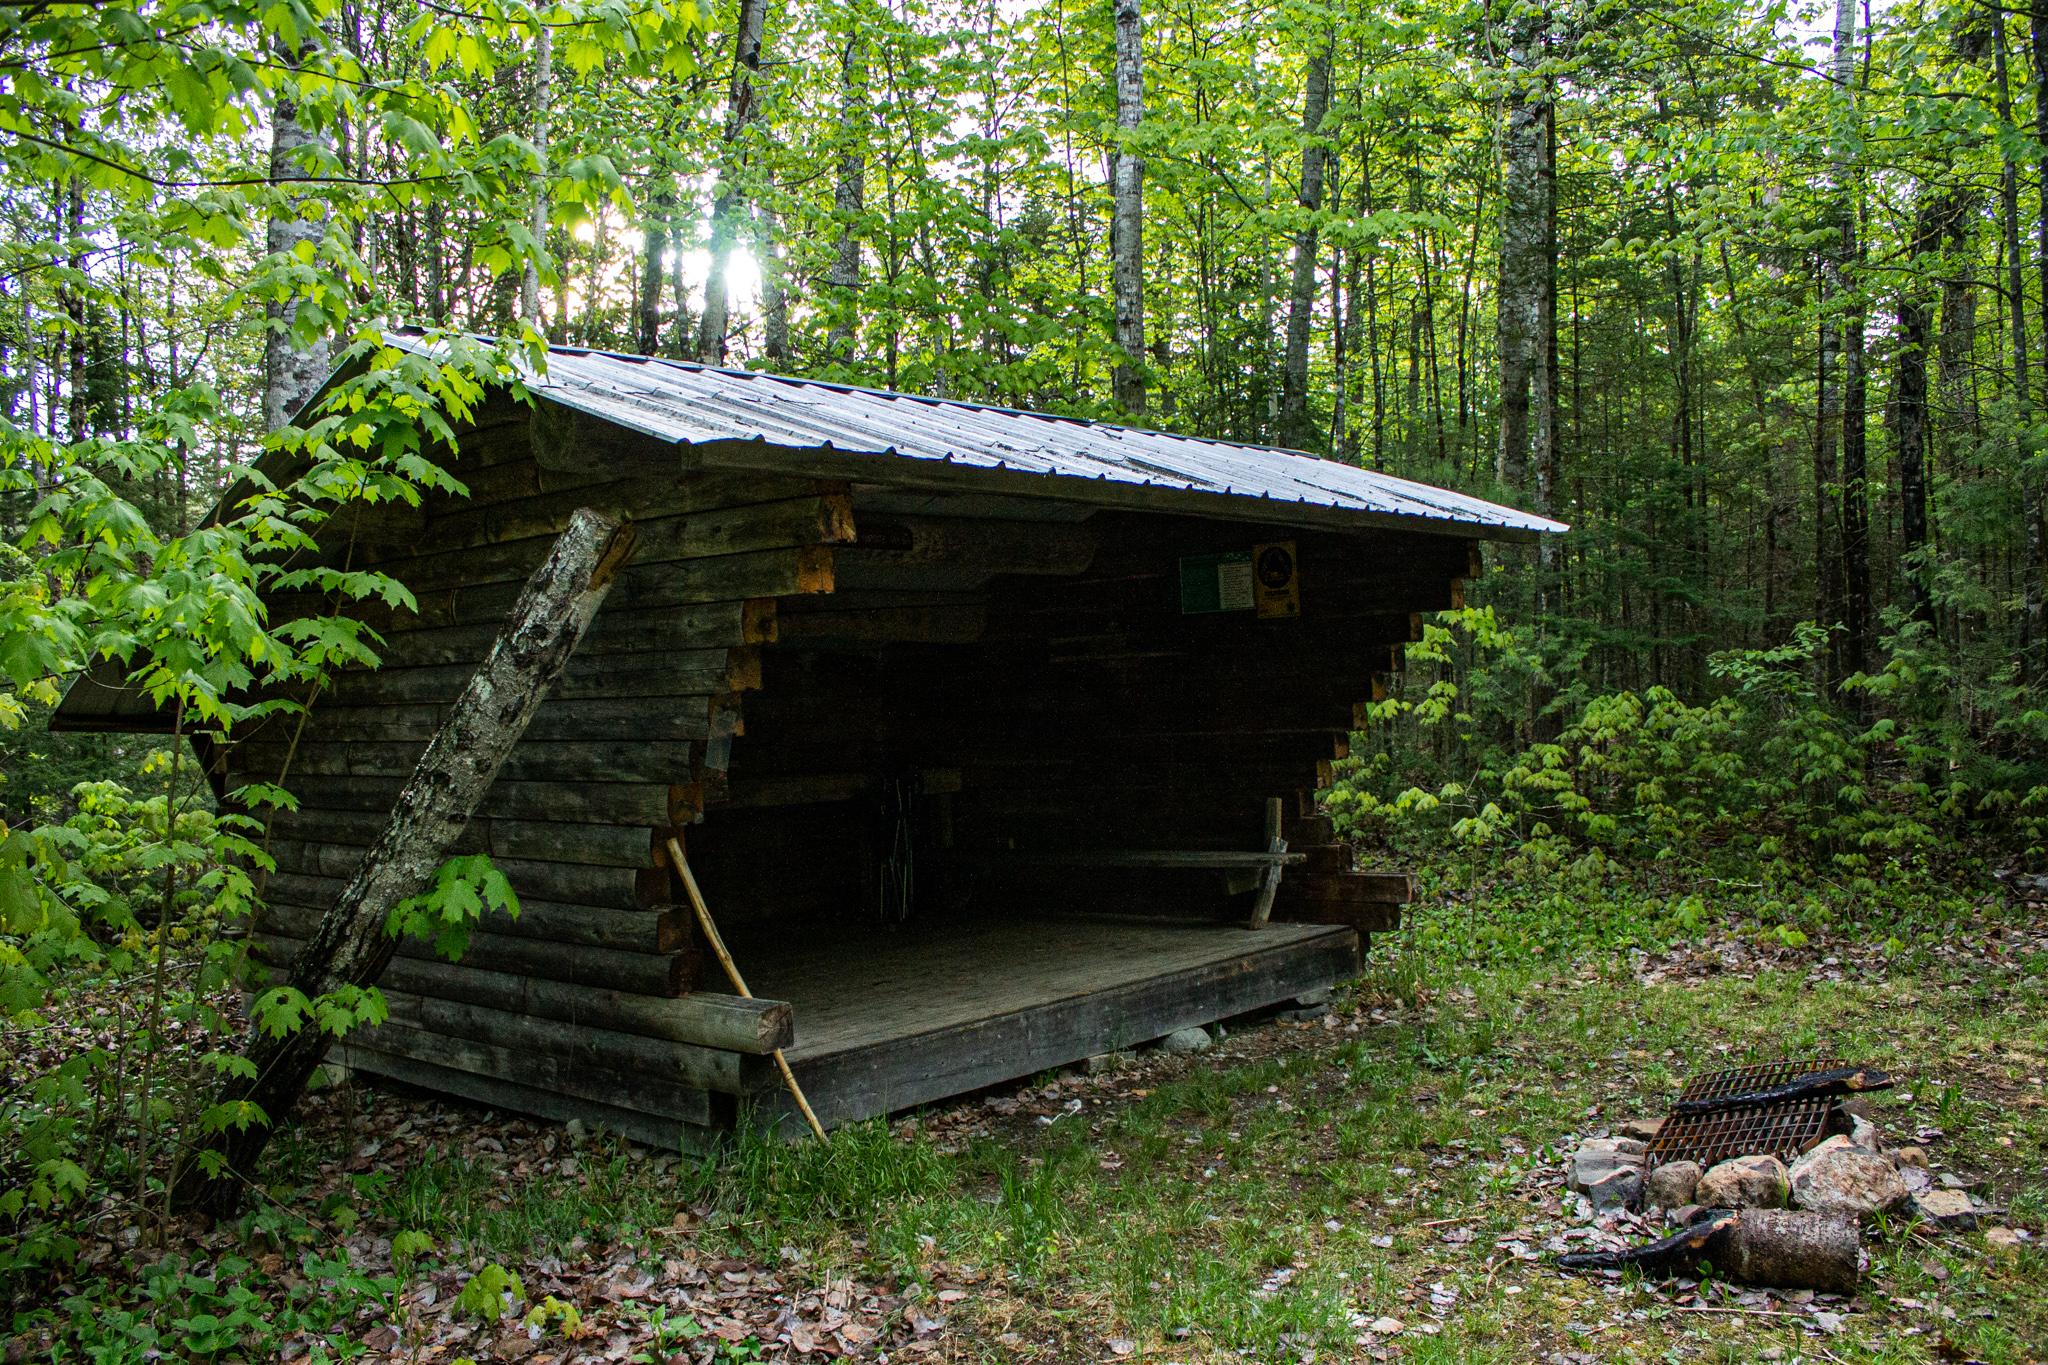 A three-sided and roofed wooden structure in the woods